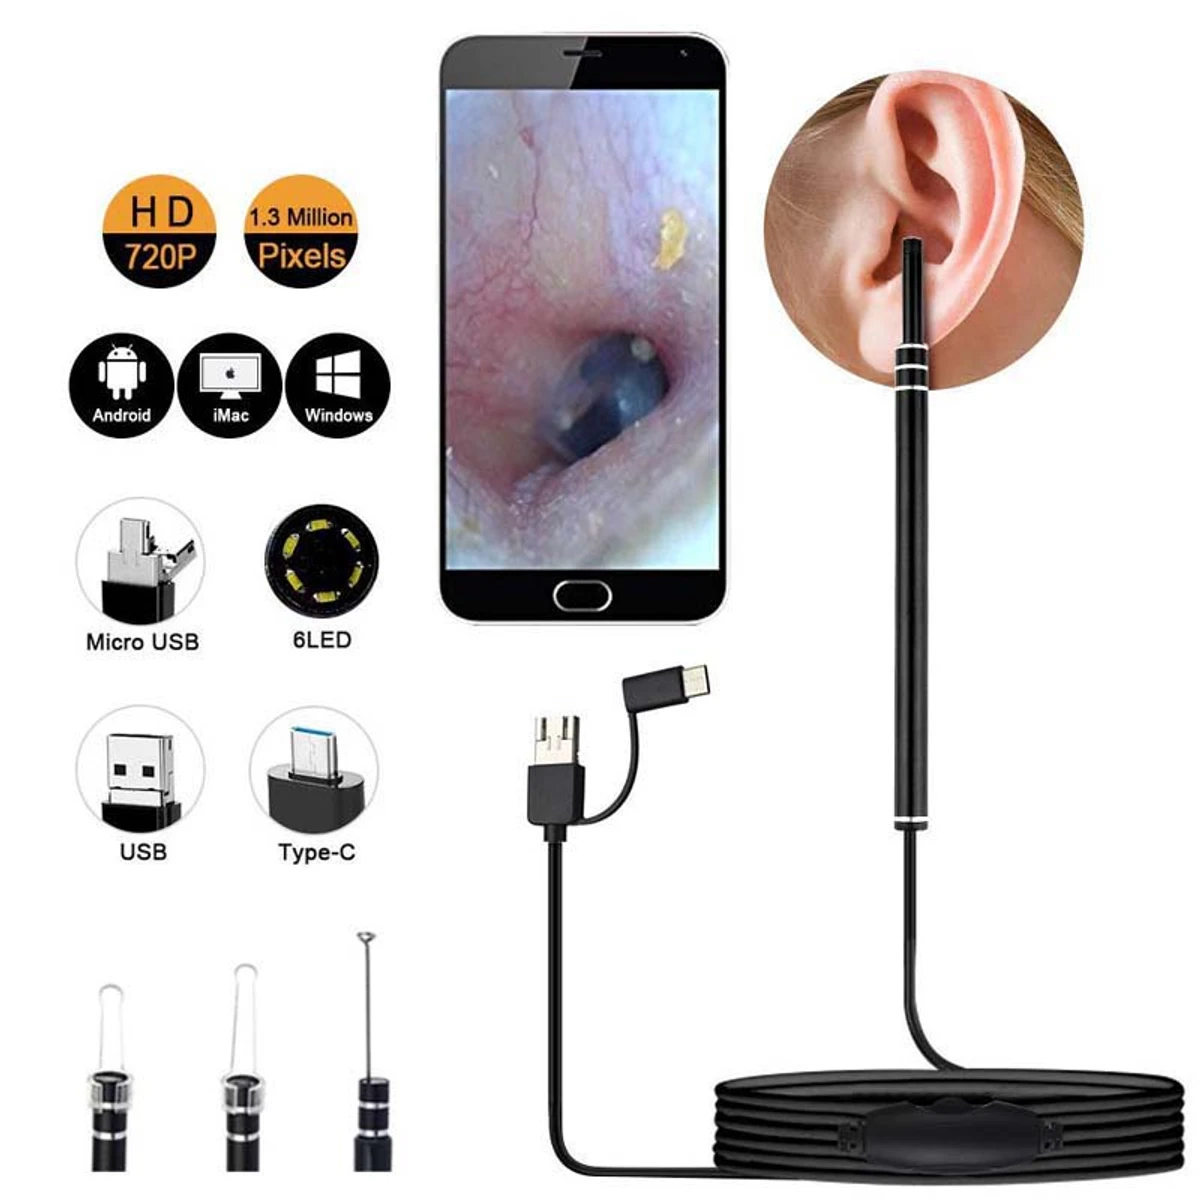 Combo Offer ( Camera Endoscope Ear Cleaning Spoon Tool+Ear Wax Removal Kit)